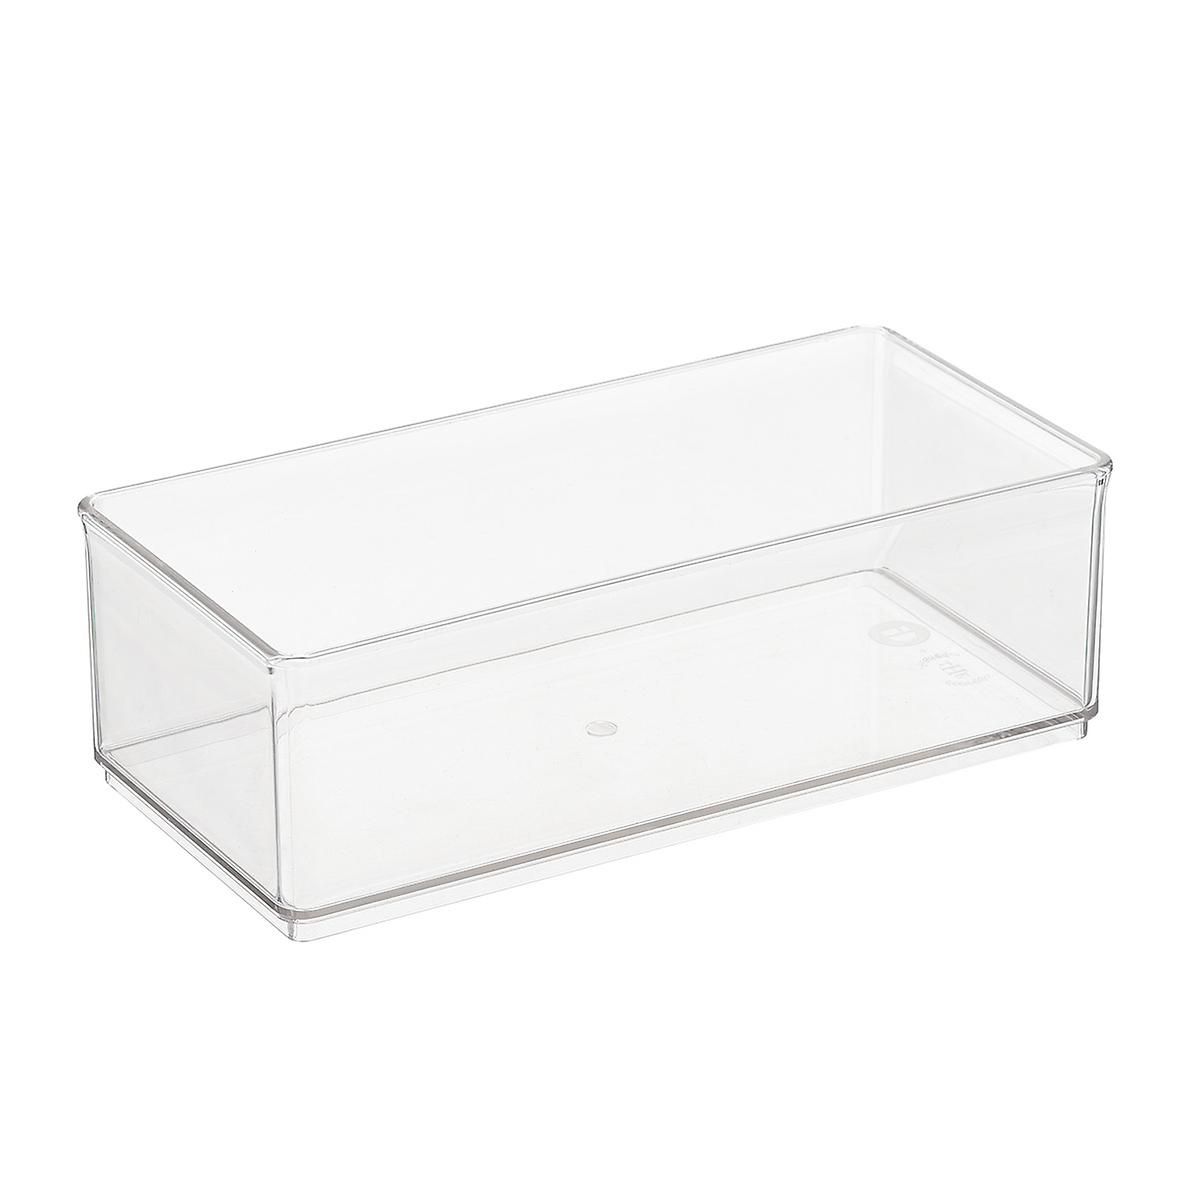 THE HOME EDIT T.H.E. Large Bin Organizer Clear | The Container Store